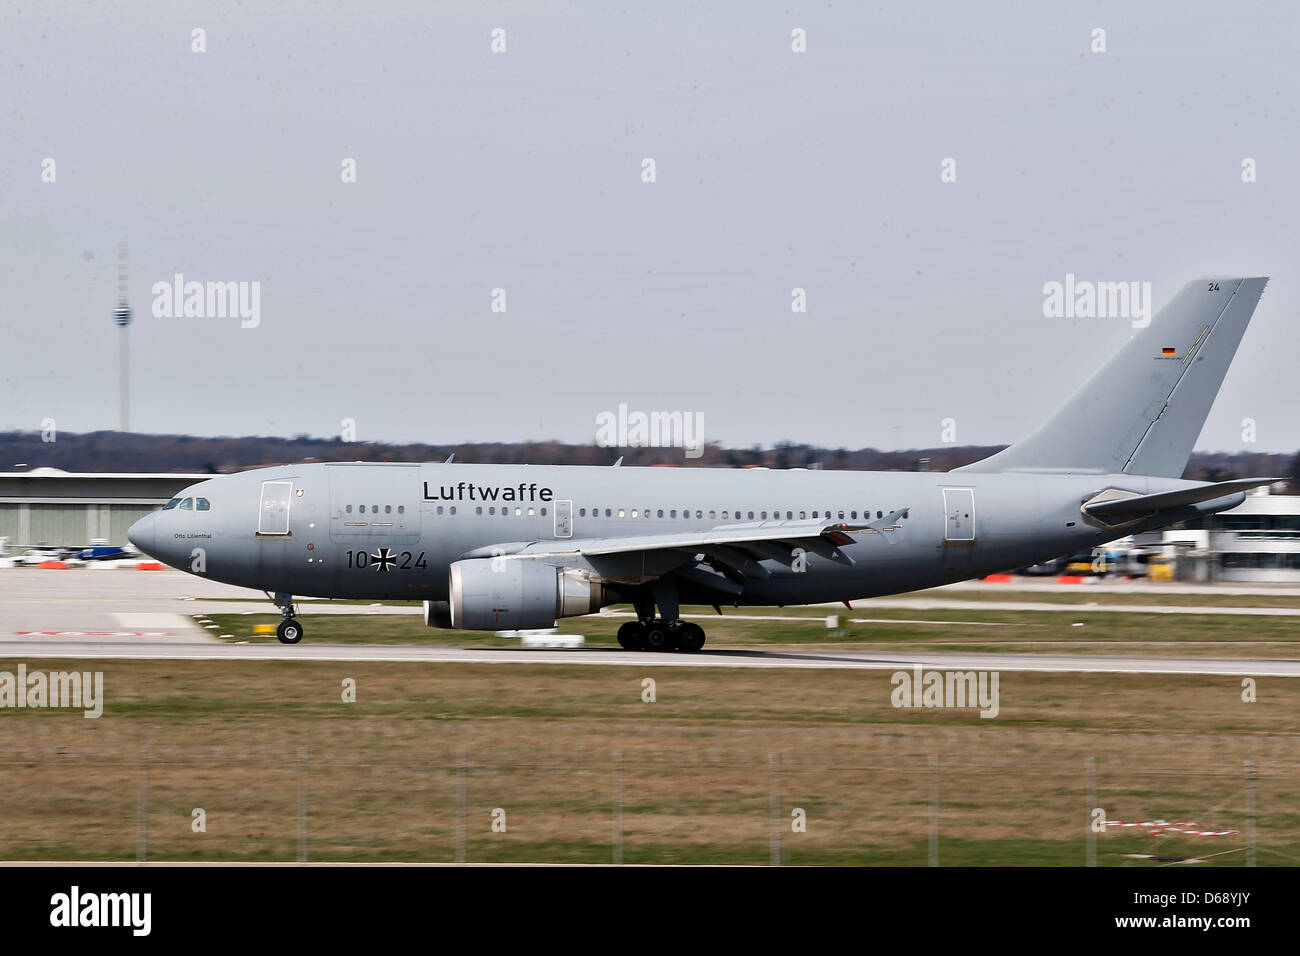 A German Army Airbus lands at the airport in Stuttgart, Germany, 15 April 2013. Critically injured victims of the civil war in Syria were transported out of Amman, Jordan, where they were being treated, for further treatment in Germany on the aircraft. Photo: THOMAS NIEDERMUELLER Stock Photo